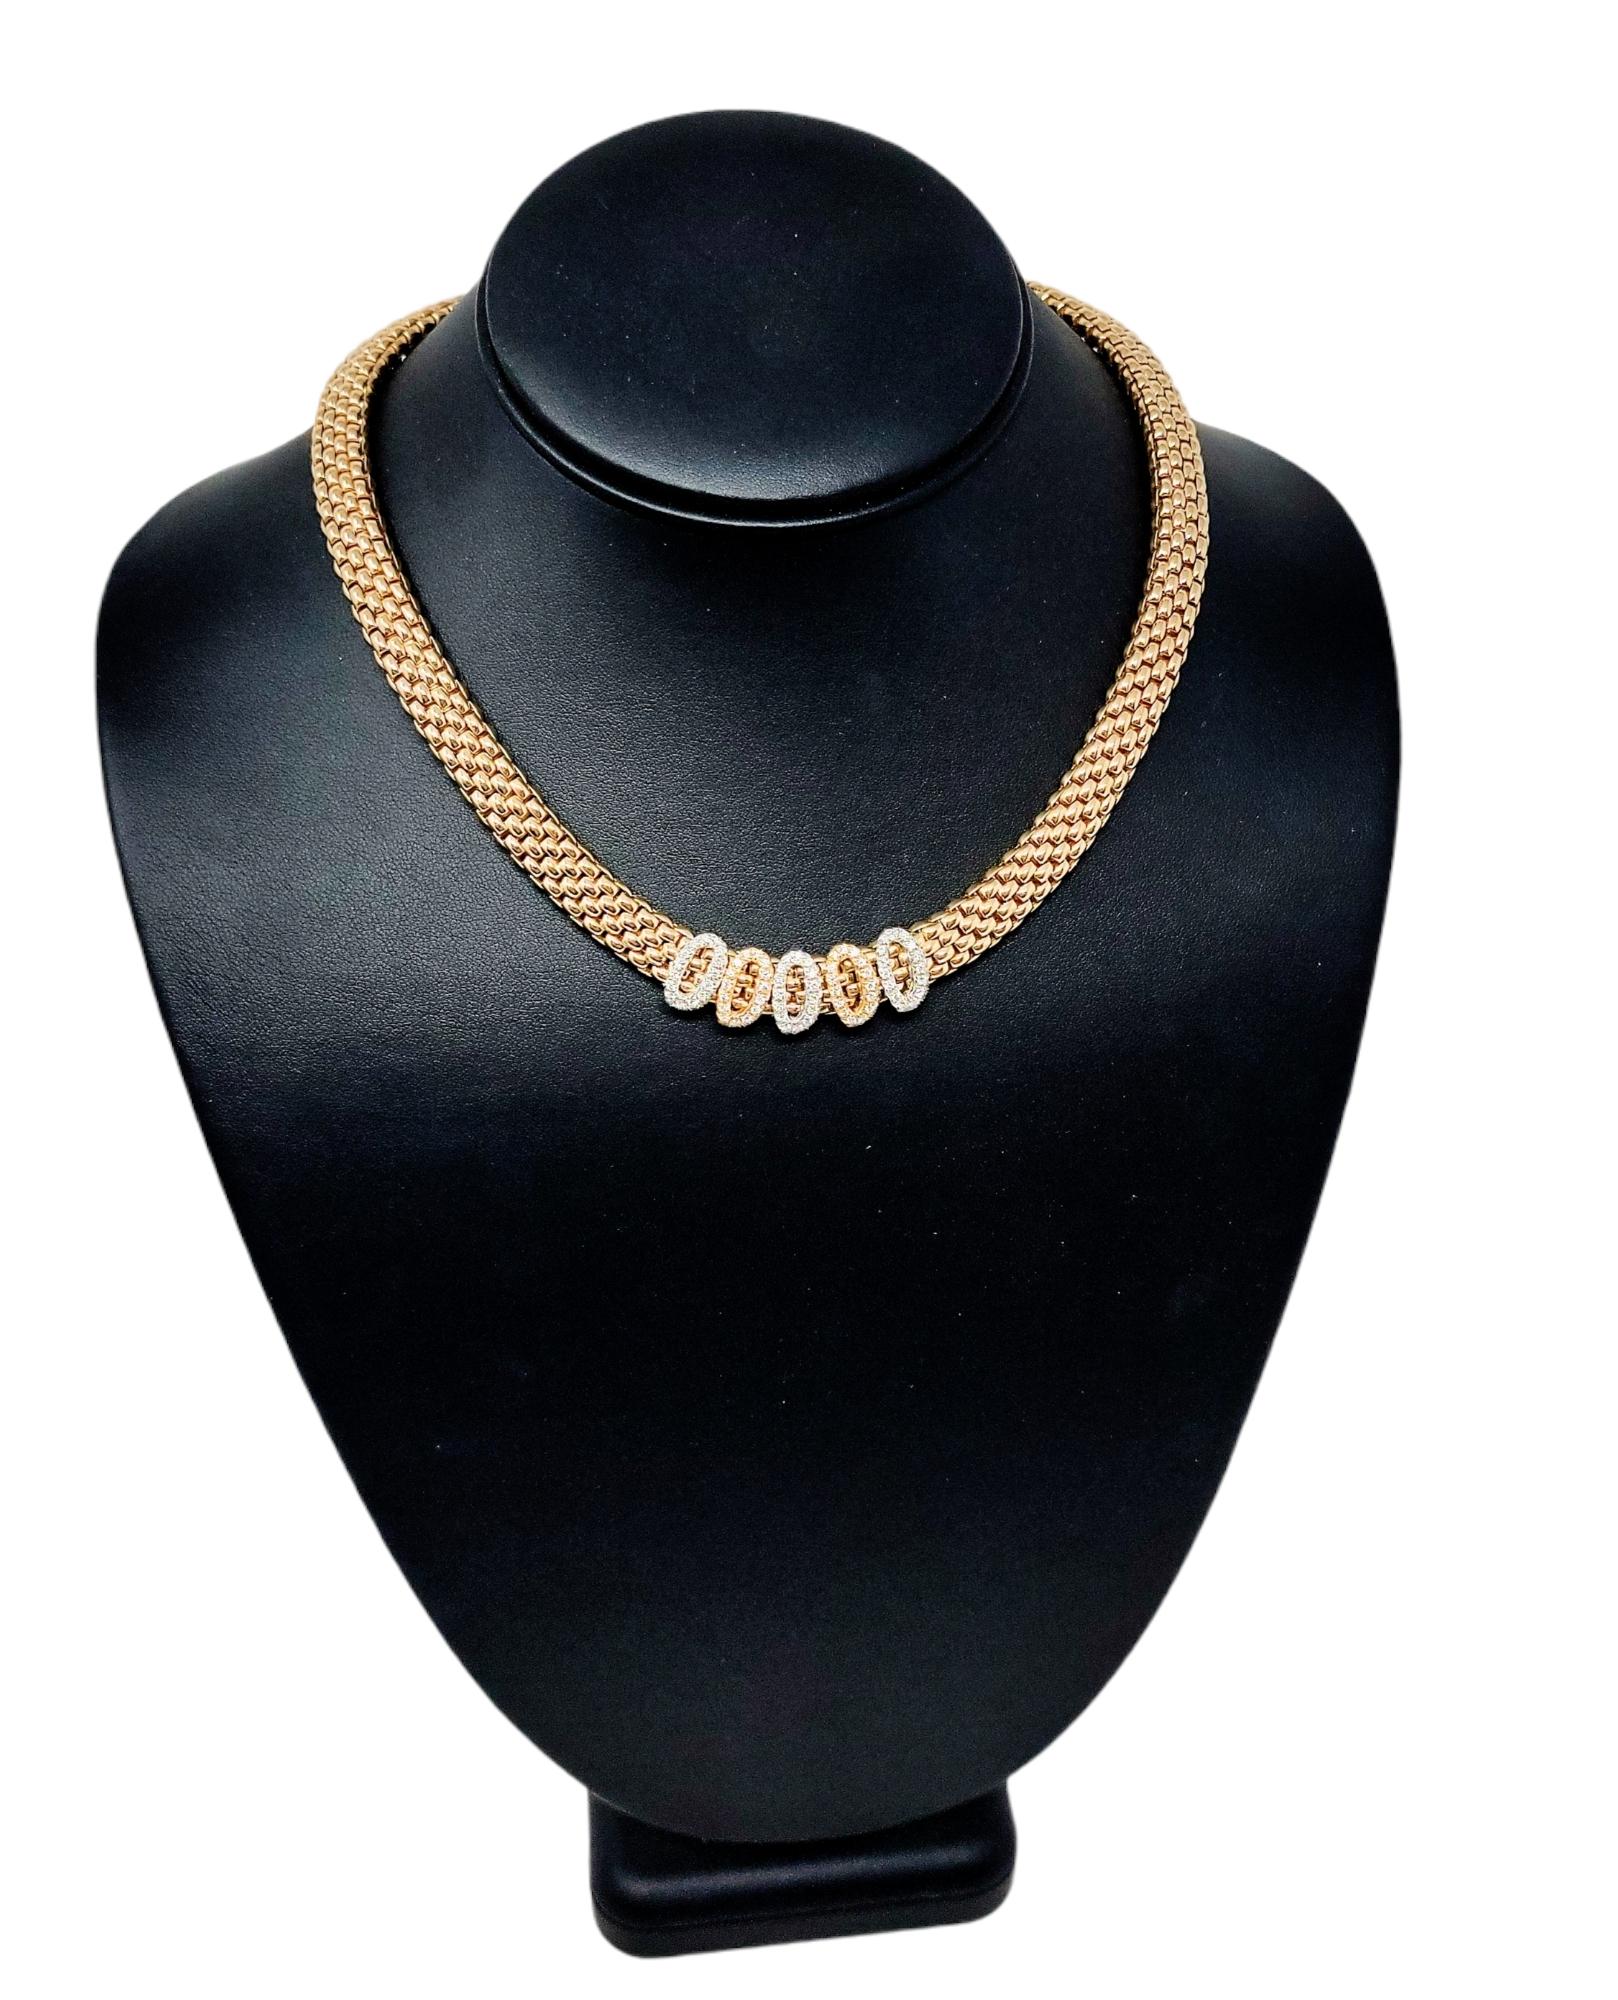 Women's Fope Novecento Mesh Tri-Tone 18 Karat Gold and Pave Diamond Necklace .75 Carats For Sale